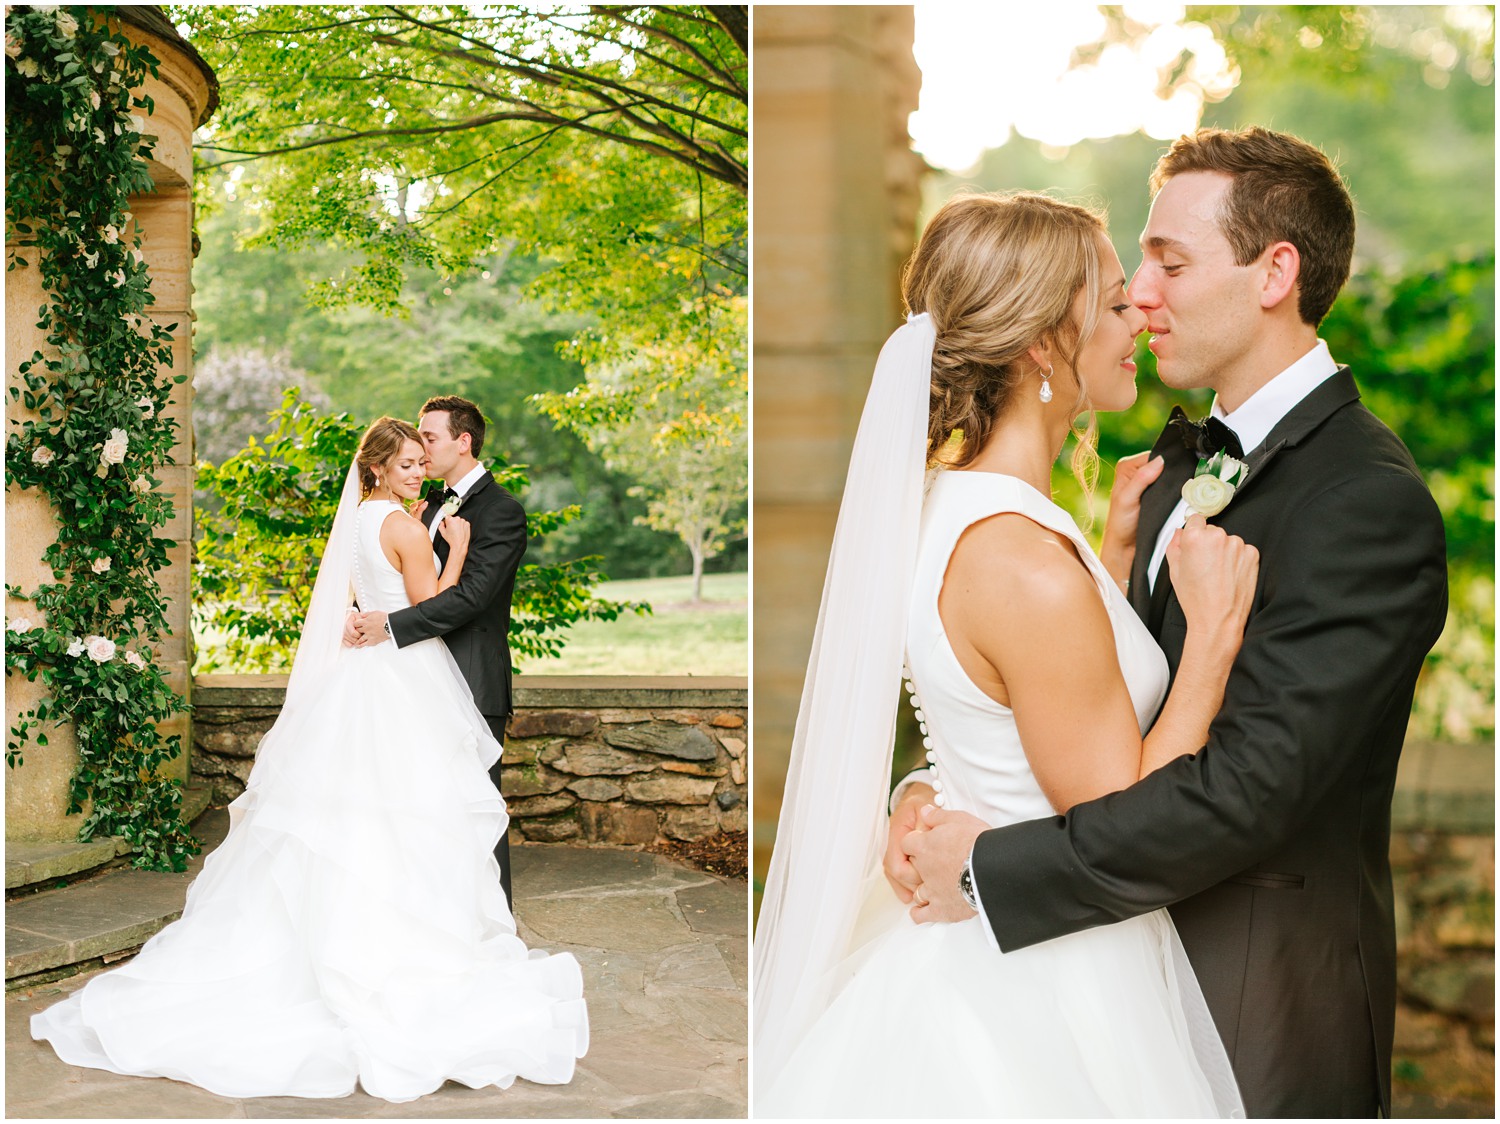 Graylyn Estate wedding portraits on stone patio with bride and groom